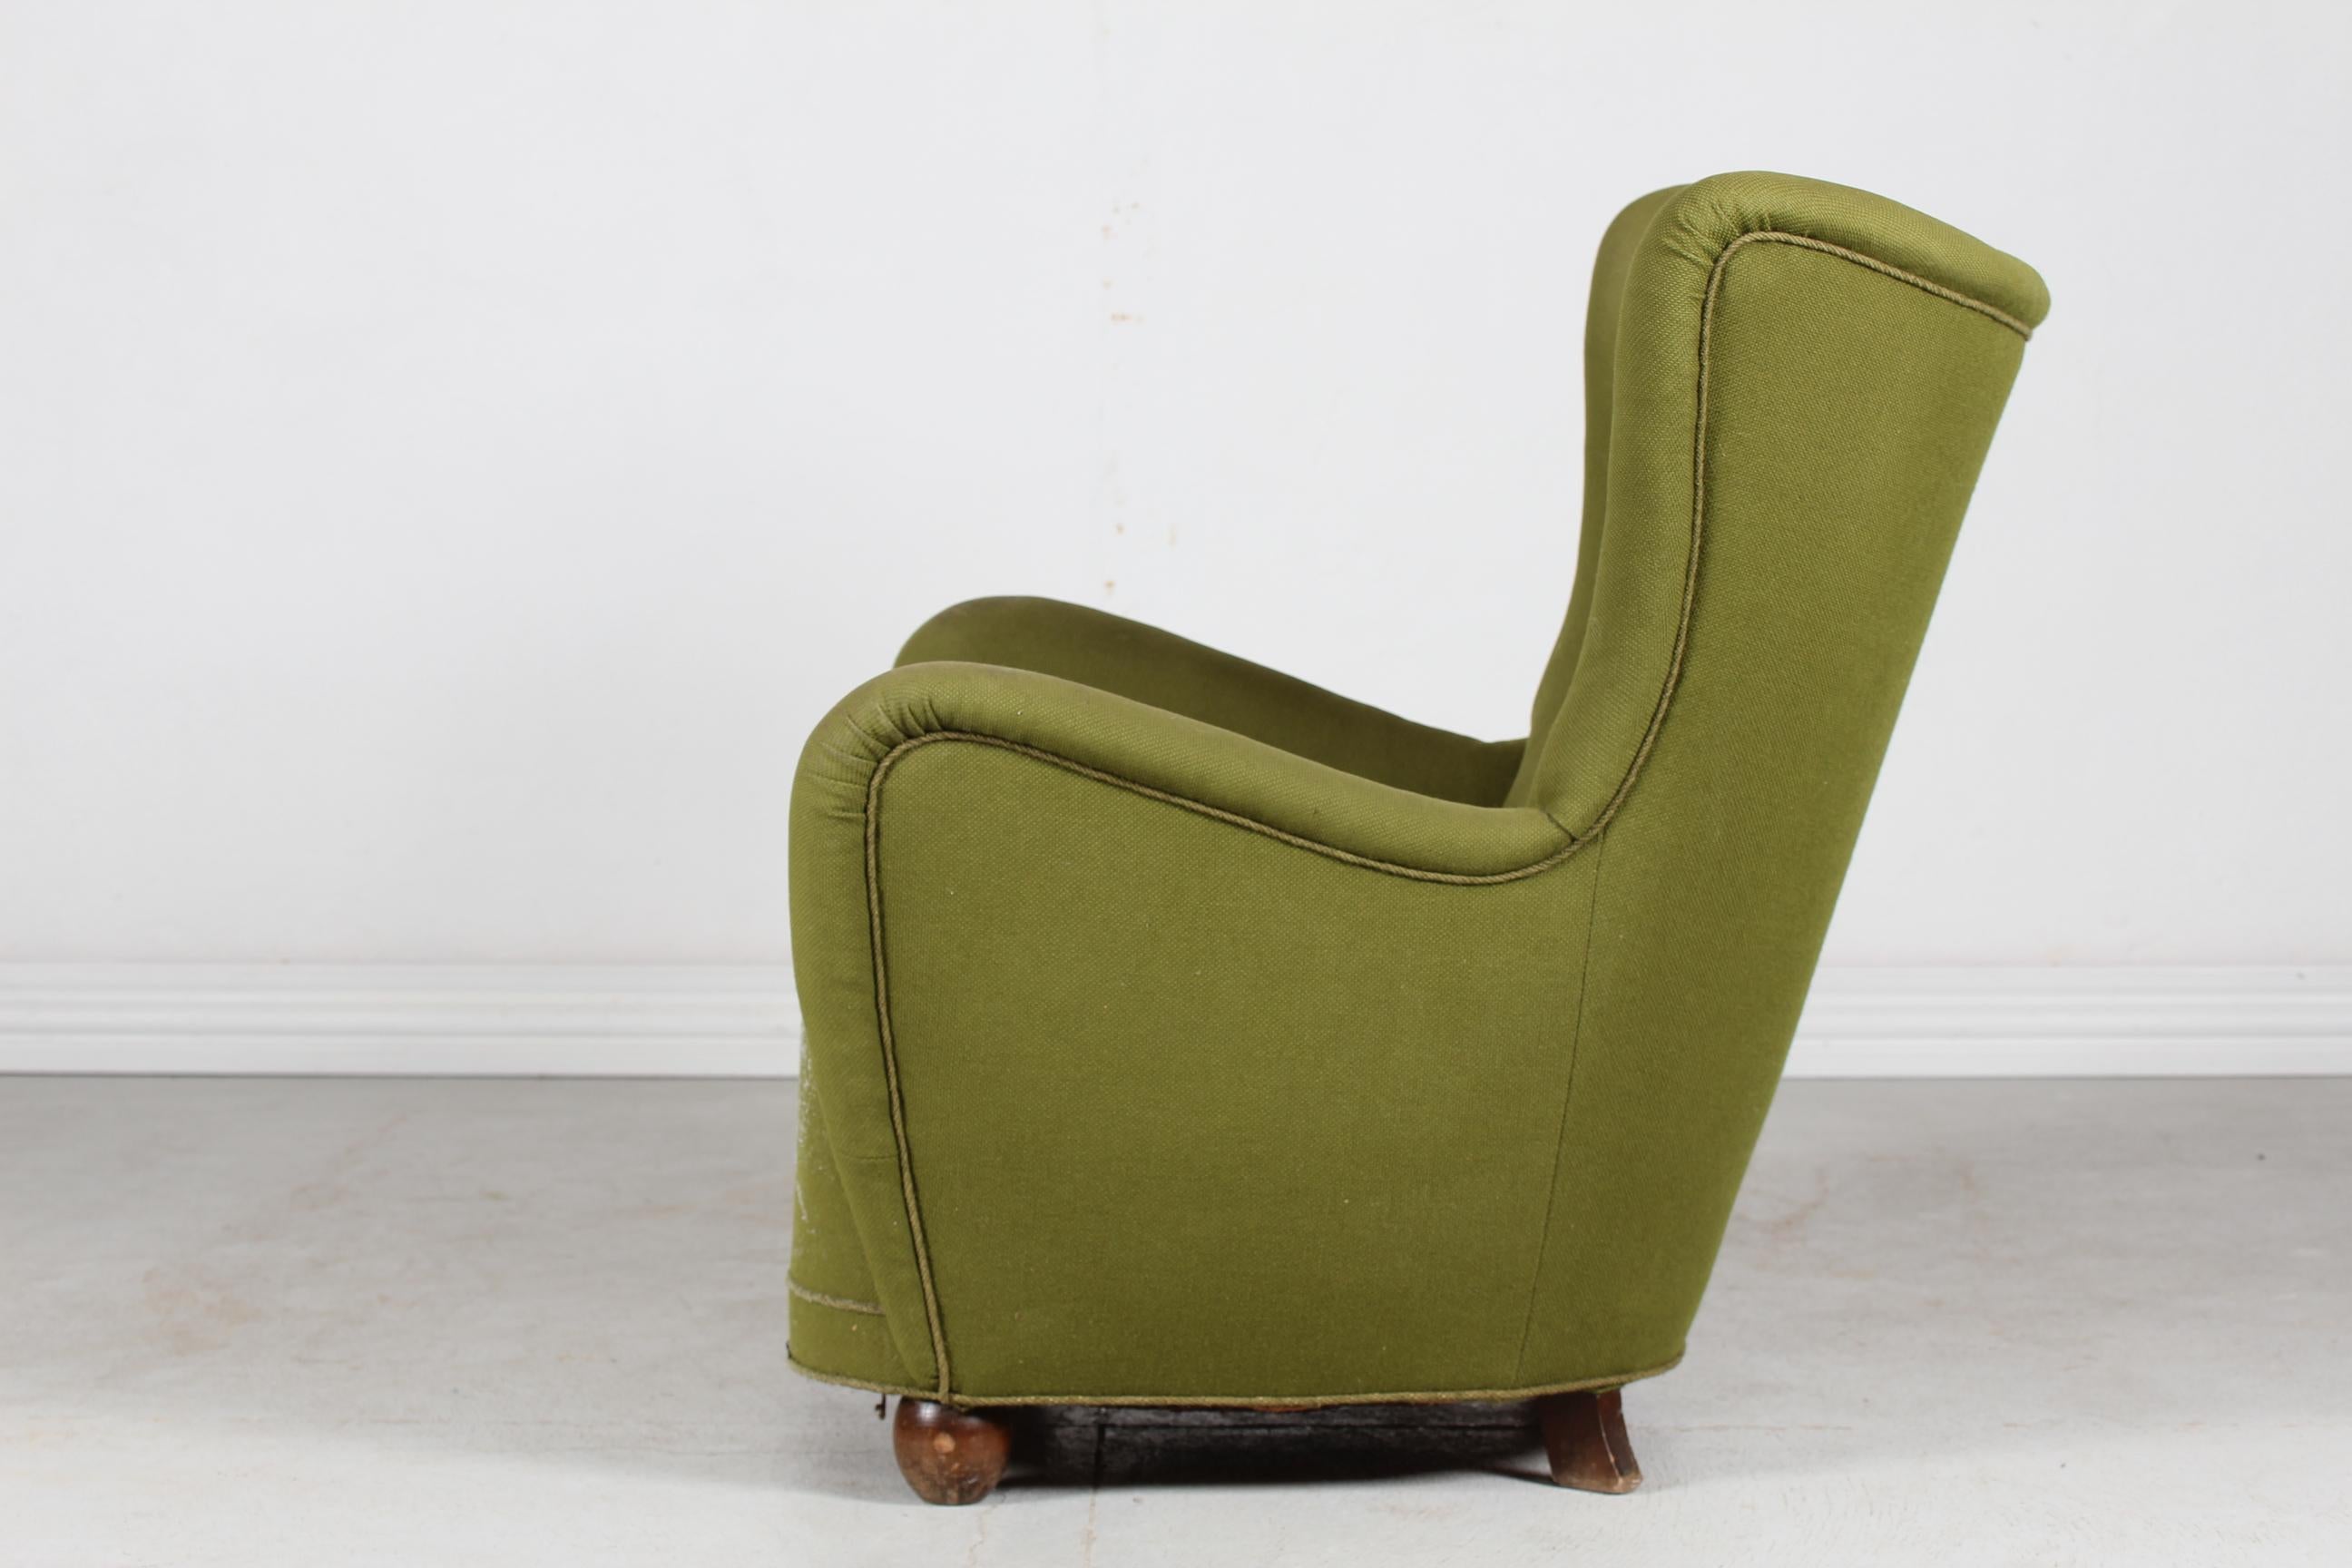 Large authentic Art Deco lounge chair from the 1940's with ball shaped front feet. The feet are made of dark stained beech wood and the comfortable chair is upholstered with dusty green fabric. 
Made by Danish cabinet maker in the 1940s in Fritz